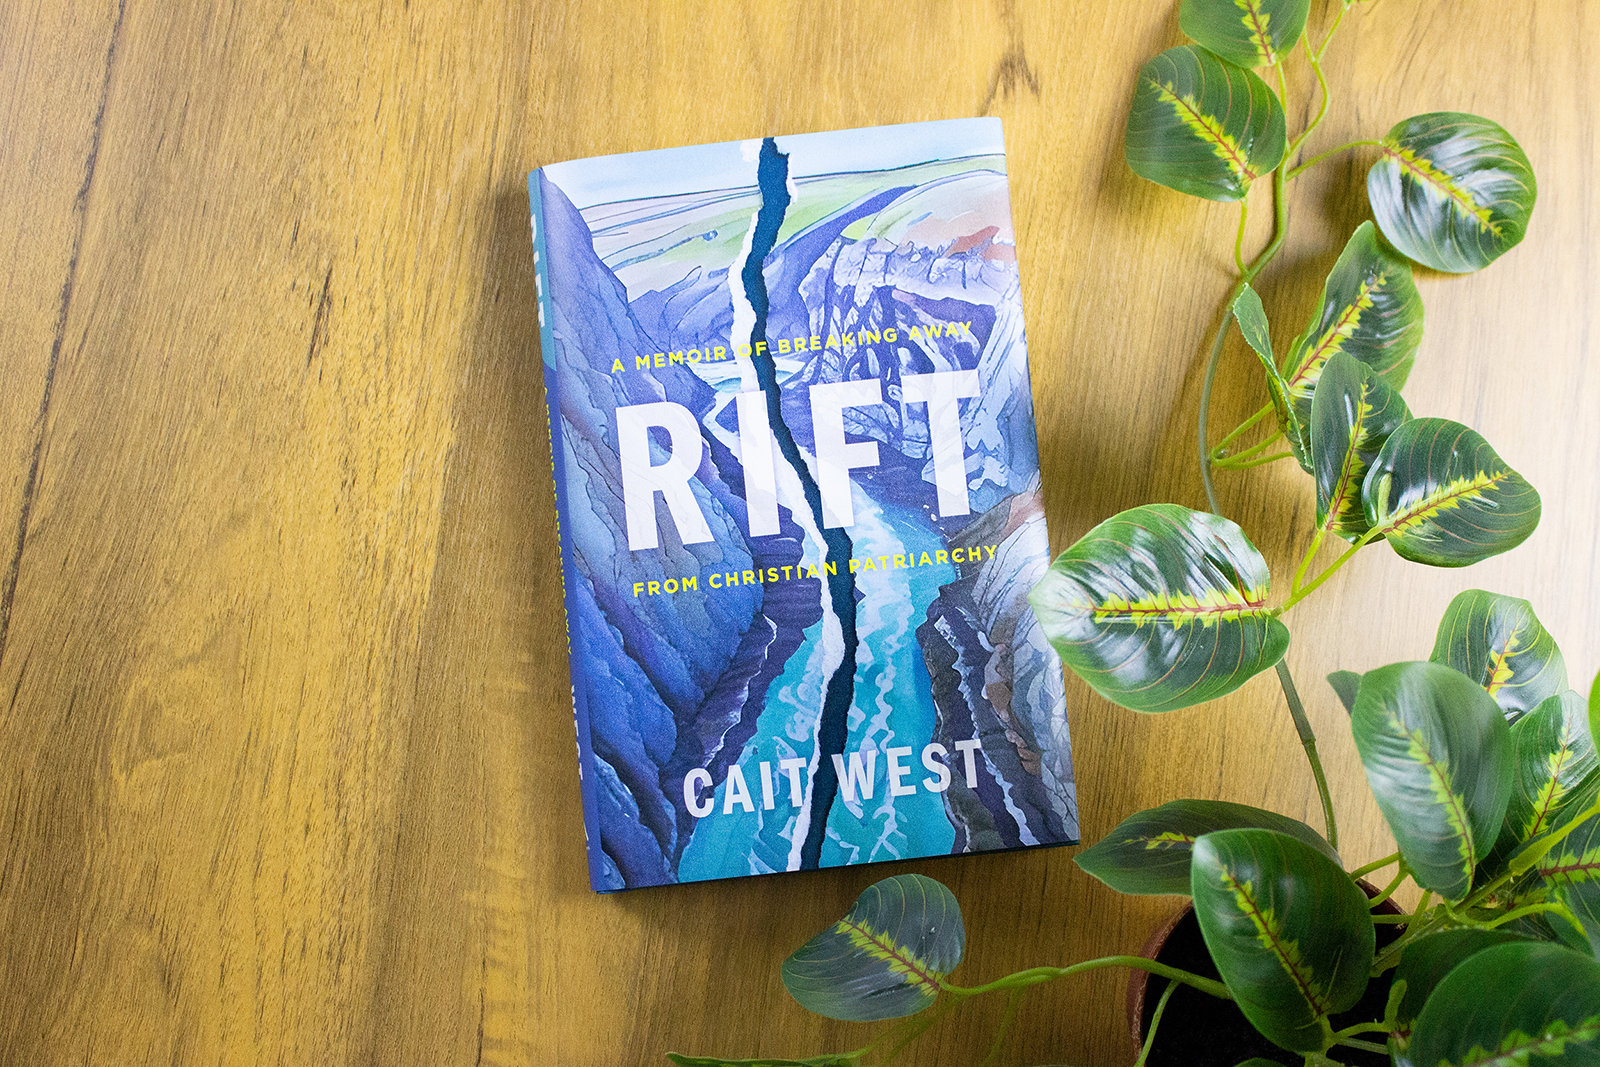 “Rift: A Memoir of Breaking Away from Christian Patriarchy